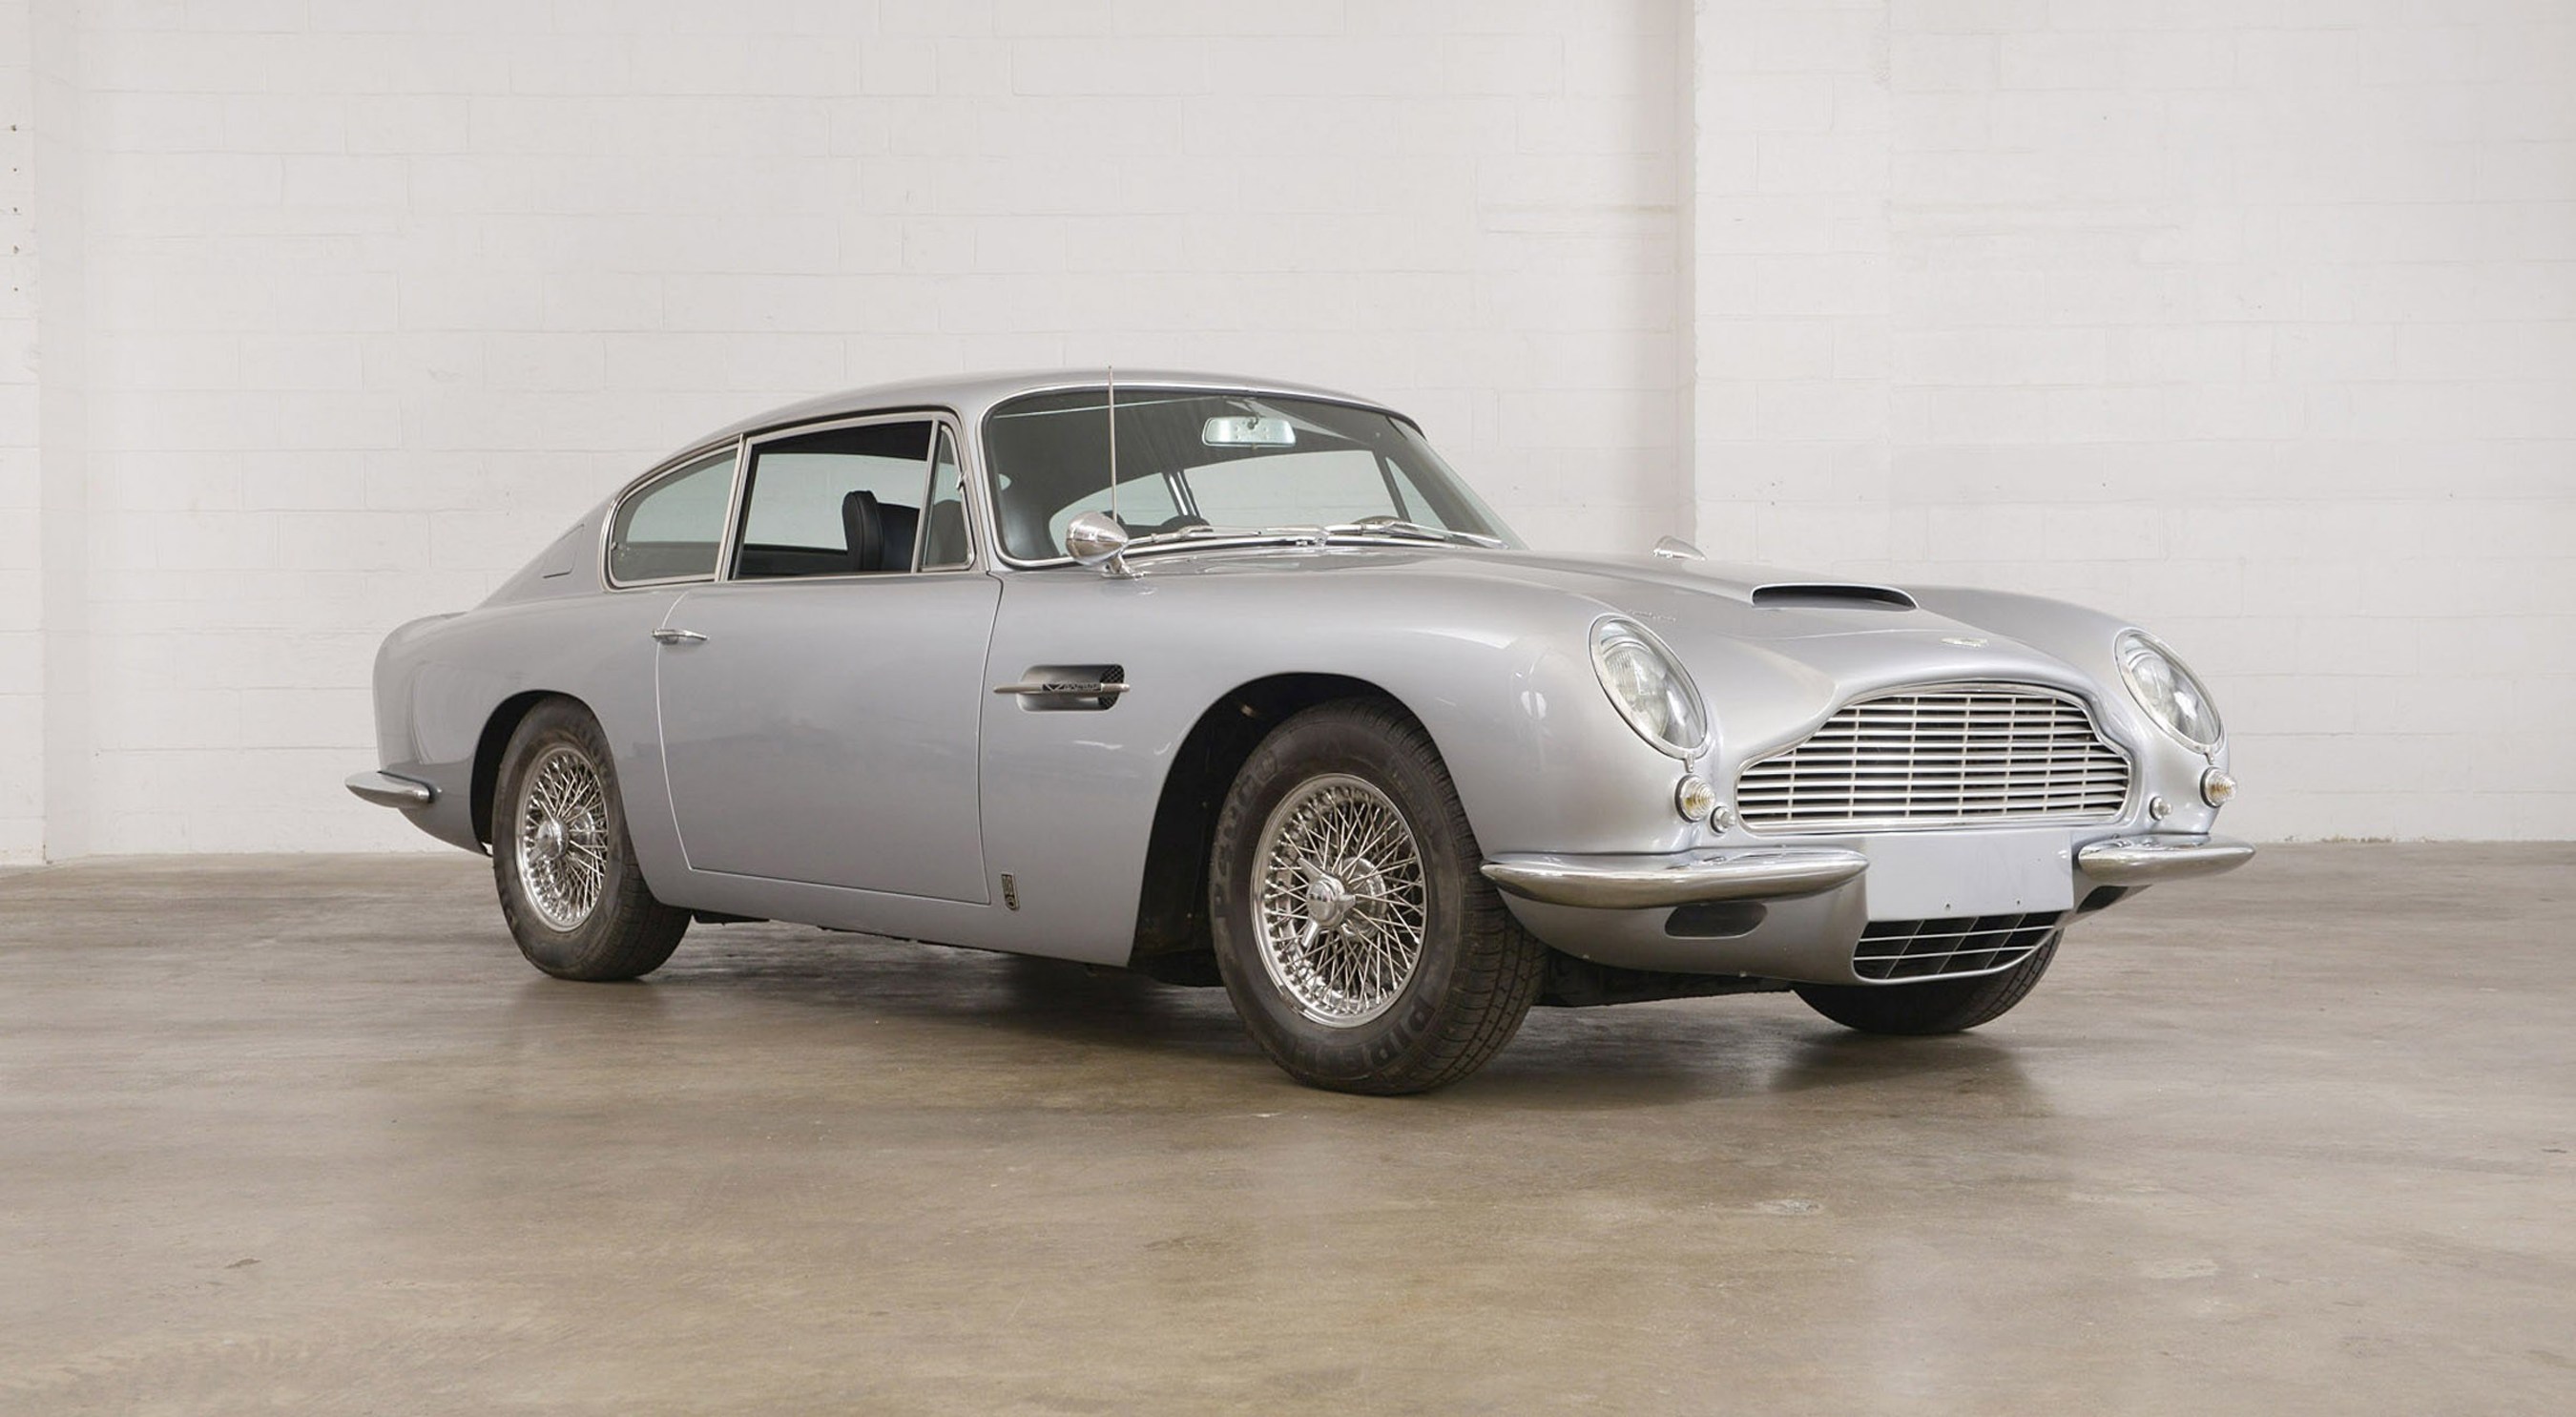 This 1966 Aston Martin DB6 Vantage is one example of the 40 significant vehicle offerings in the November 19th, 2015 "Rolling Sculpture" auction, an inaugural event hosted by Keno Brothers Fine Automobile Auctions and powered by Proxibid, the most trusted online Marketplace for  buying and selling highly valued items on  a global level.  Prebids are open and more information can be found at www.proxibid.com/kenobrothers.